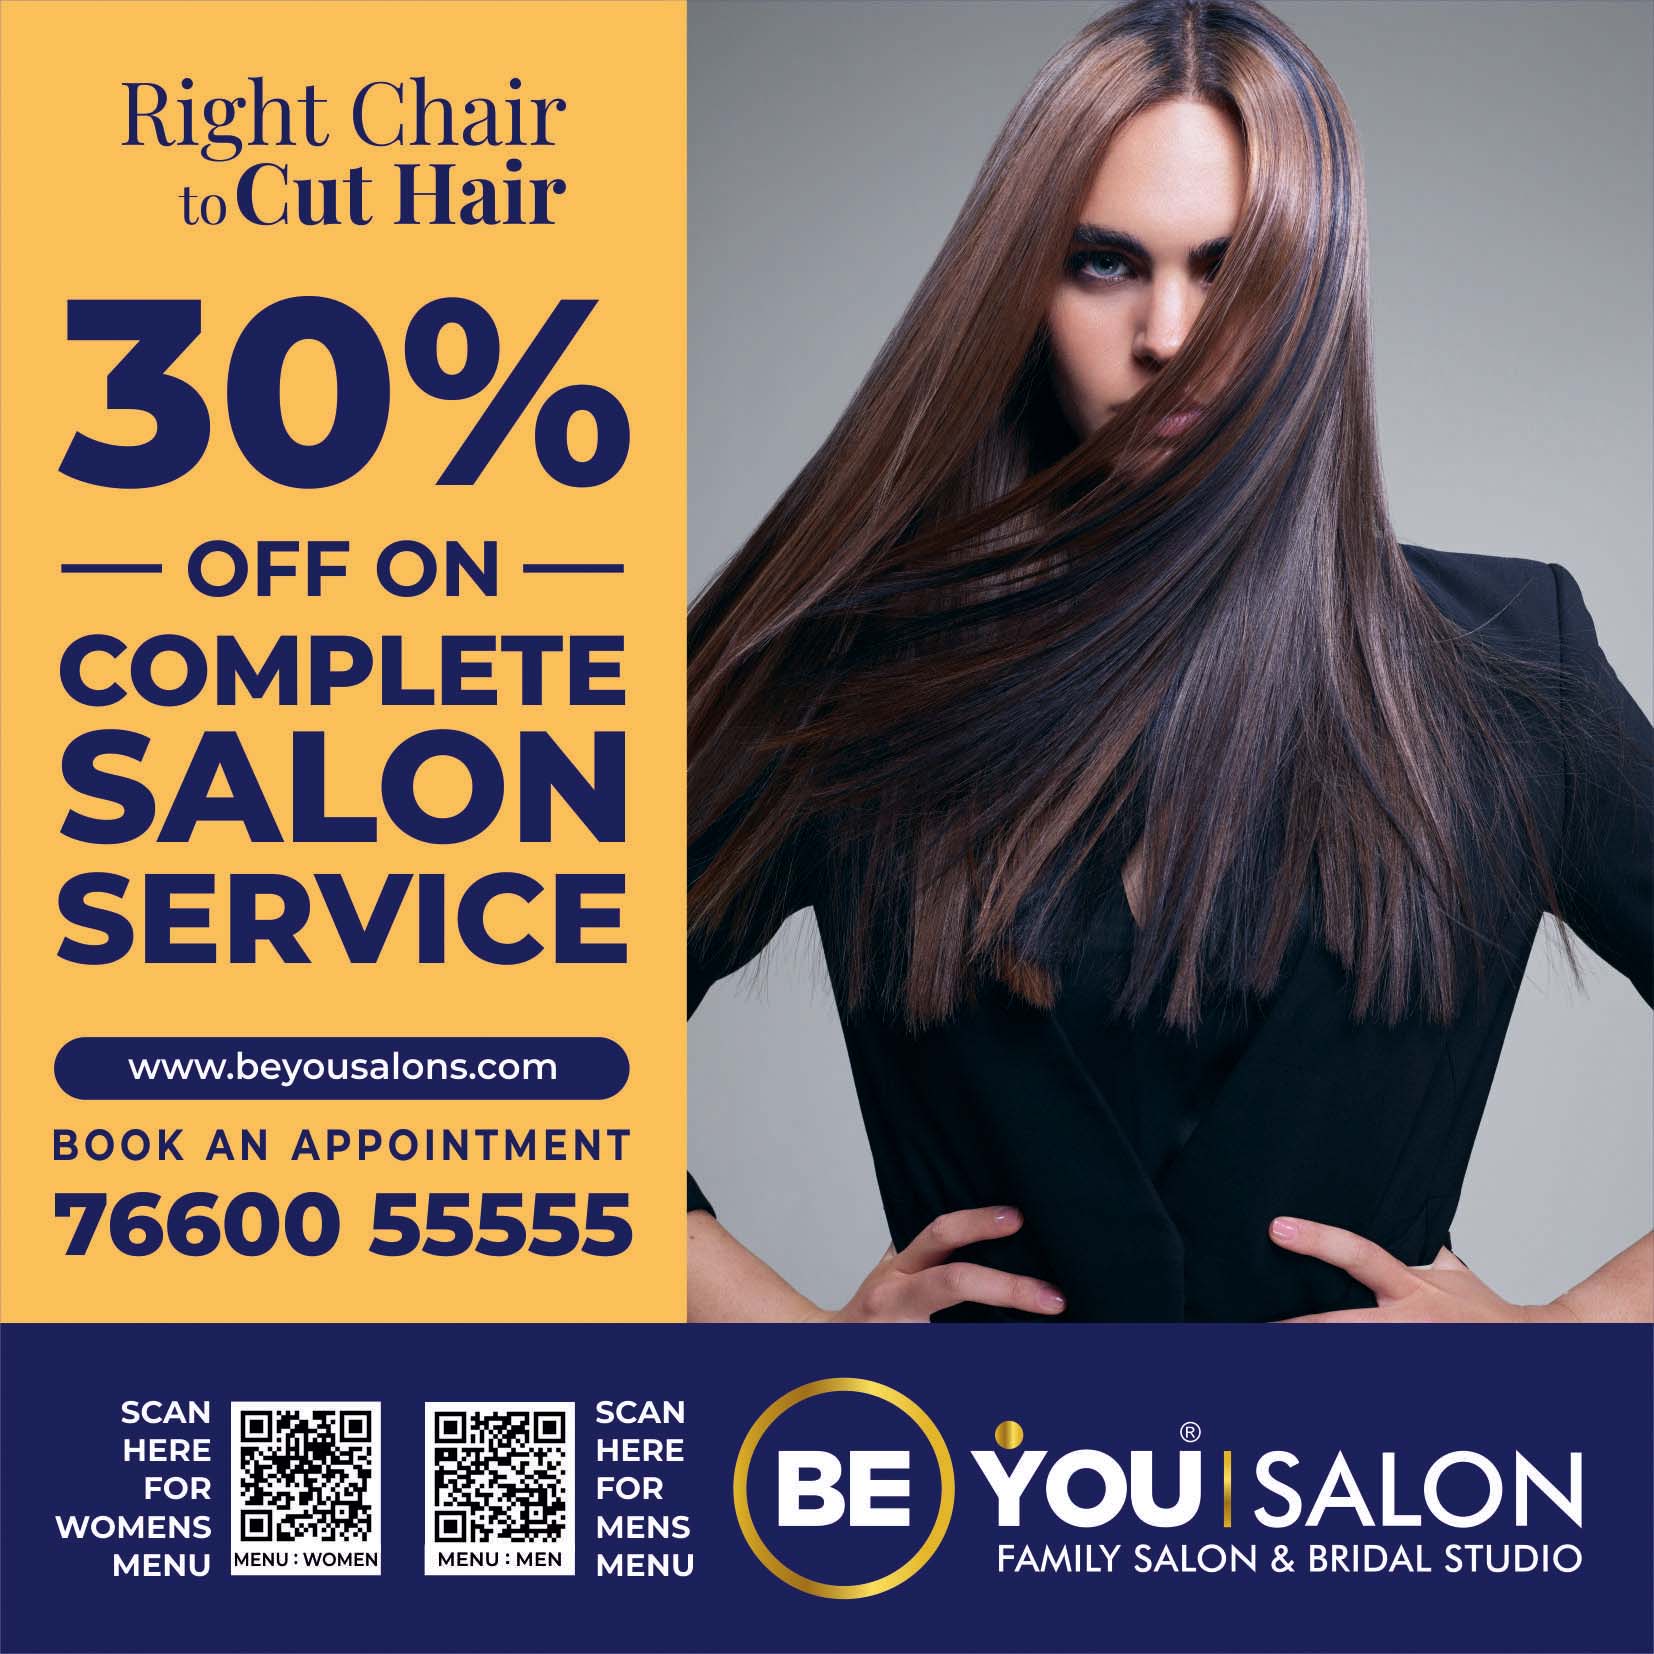 Be You Salons – International salon and spa experience